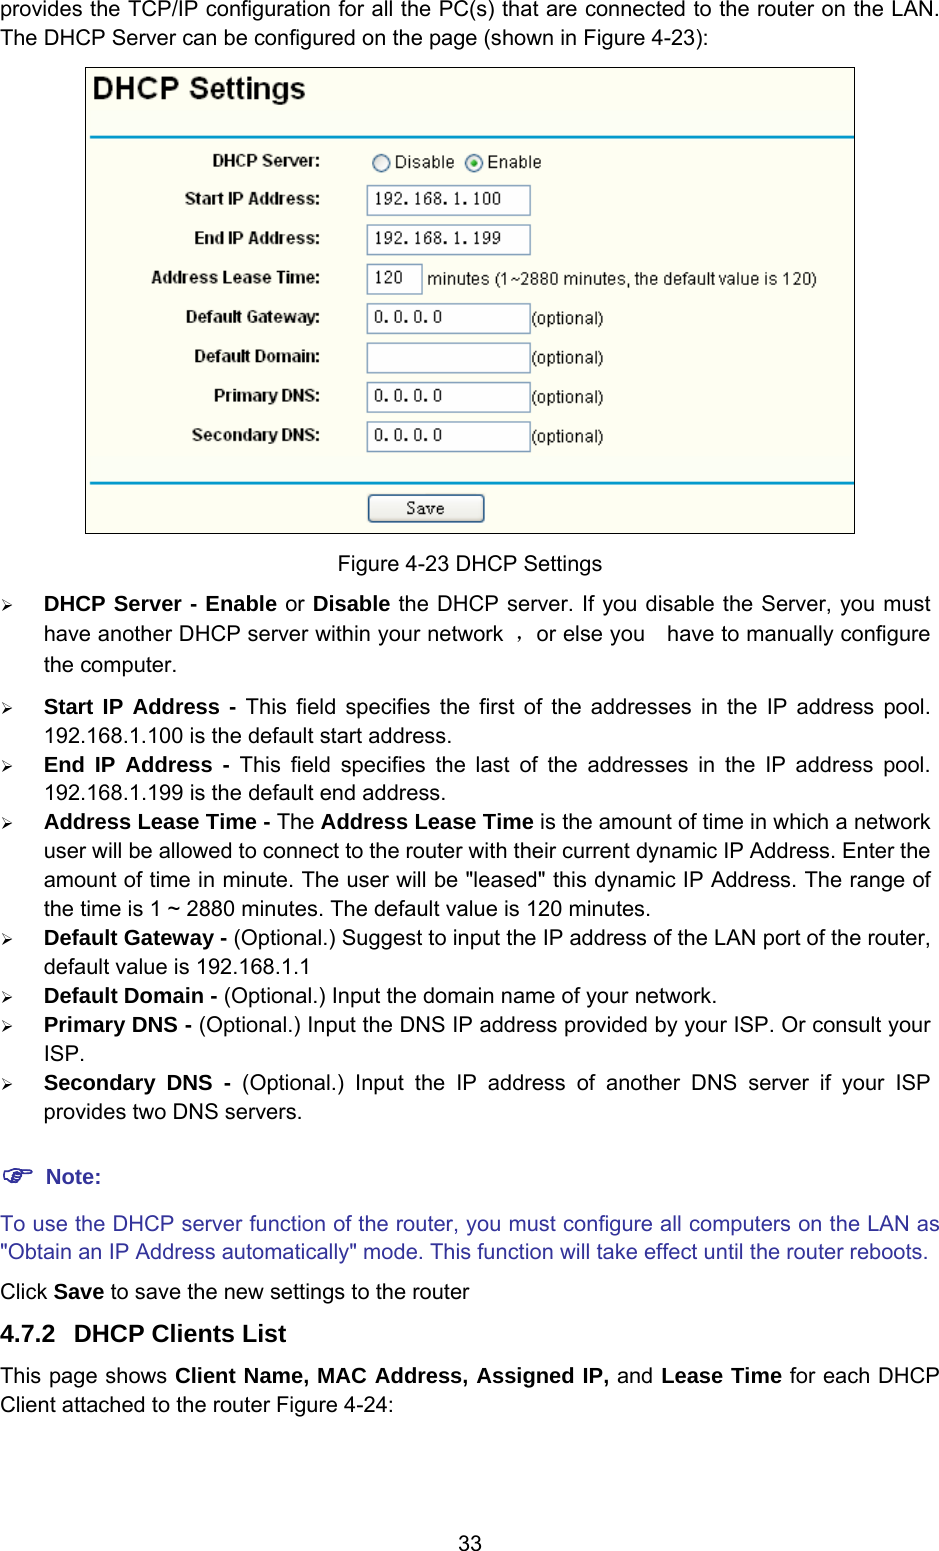  33 provides the TCP/IP configuration for all the PC(s) that are connected to the router on the LAN. The DHCP Server can be configured on the page (shown in Figure 4-23):  Figure 4-23 DHCP Settings ¾ DHCP Server - Enable or Disable the DHCP server. If you disable the Server, you must have another DHCP server within your network  ，or else you    have to manually configure the computer. ¾ Start IP Address - This field specifies the first of the addresses in the IP address pool. 192.168.1.100 is the default start address. ¾ End IP Address - This field specifies the last of the addresses in the IP address pool. 192.168.1.199 is the default end address. ¾ Address Lease Time - The Address Lease Time is the amount of time in which a network user will be allowed to connect to the router with their current dynamic IP Address. Enter the amount of time in minute. The user will be &quot;leased&quot; this dynamic IP Address. The range of the time is 1 ~ 2880 minutes. The default value is 120 minutes. ¾ Default Gateway - (Optional.) Suggest to input the IP address of the LAN port of the router, default value is 192.168.1.1 ¾ Default Domain - (Optional.) Input the domain name of your network. ¾ Primary DNS - (Optional.) Input the DNS IP address provided by your ISP. Or consult your ISP. ¾ Secondary DNS - (Optional.) Input the IP address of another DNS server if your ISP provides two DNS servers. ) Note: To use the DHCP server function of the router, you must configure all computers on the LAN as &quot;Obtain an IP Address automatically&quot; mode. This function will take effect until the router reboots. Click Save to save the new settings to the router 4.7.2  DHCP Clients List This page shows Client Name, MAC Address, Assigned IP, and Lease Time for each DHCP Client attached to the router Figure 4-24: 